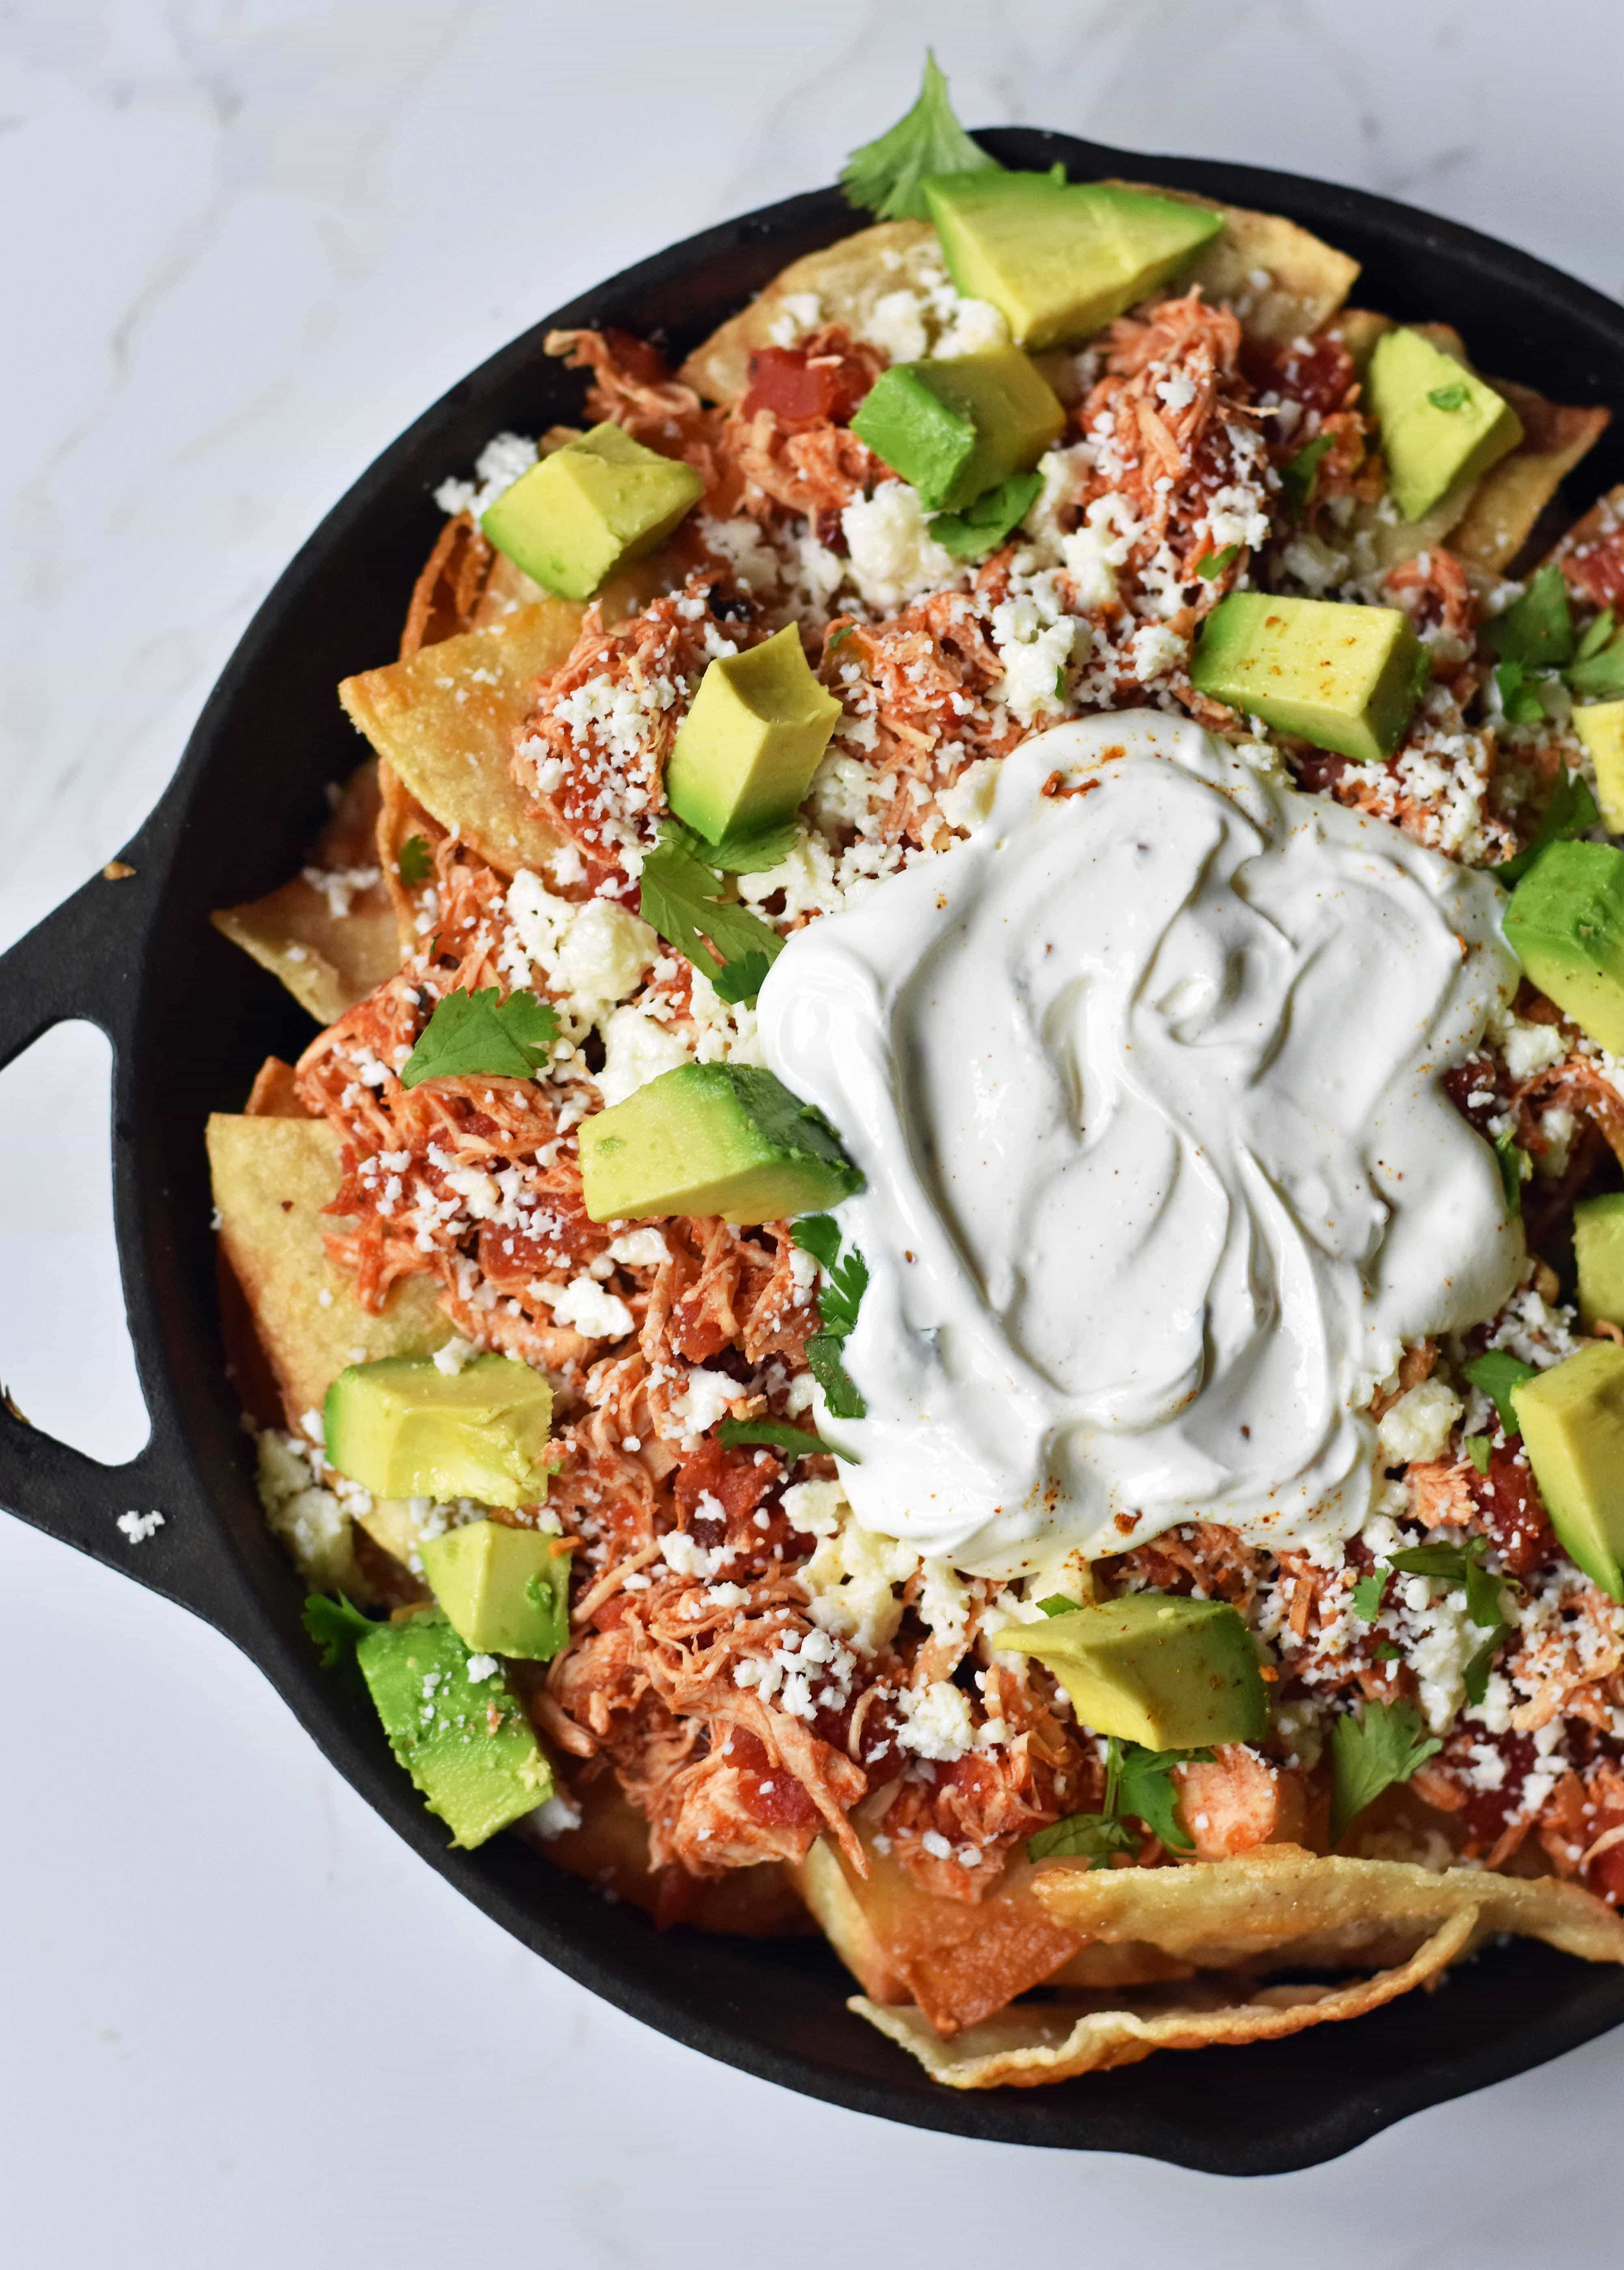 Easy Chicken Chilaquiles. How to make easy chicken chilaquiles with chipotle chicken, mexican cheese, and fresh avocado. A flavorful Mexican meal. www.modernhoney.com